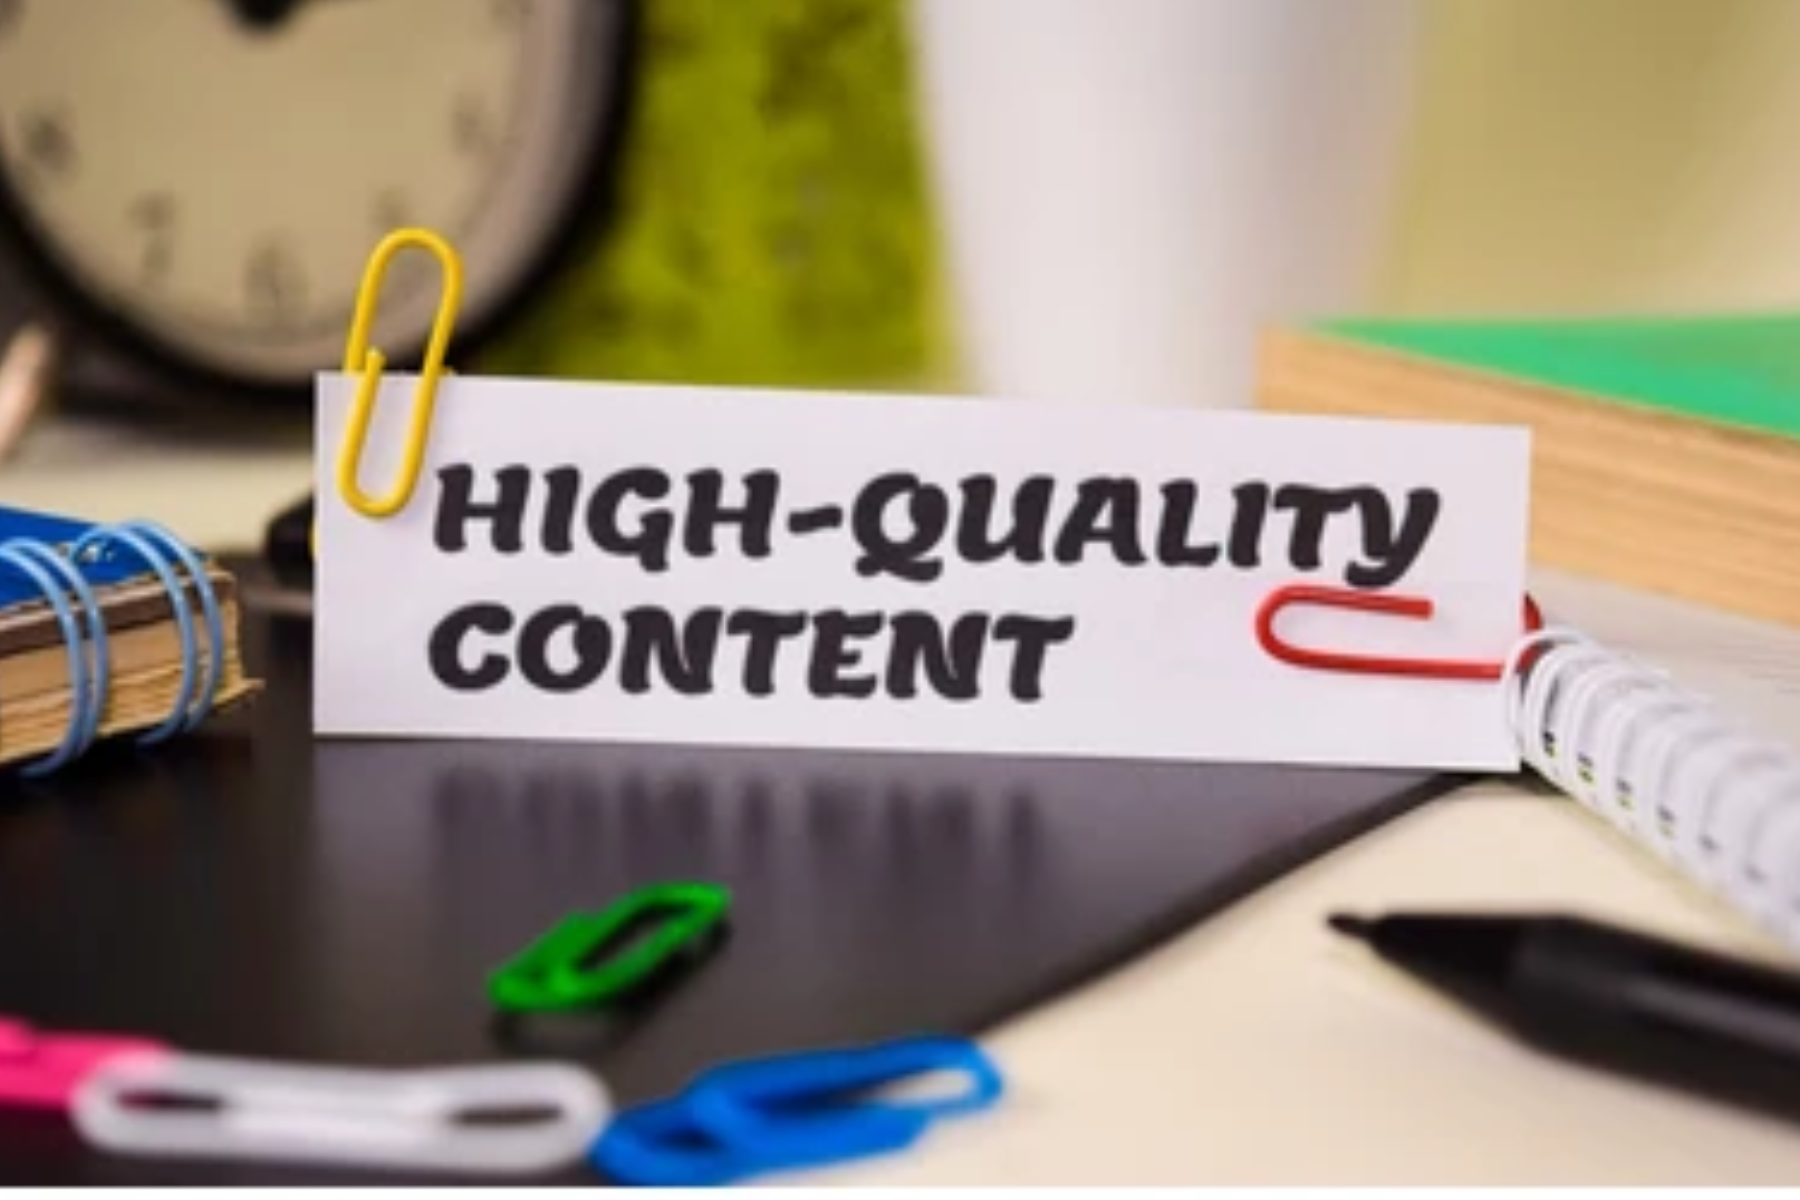 On top of a desk, a piece of paper with the words "High-quality content"